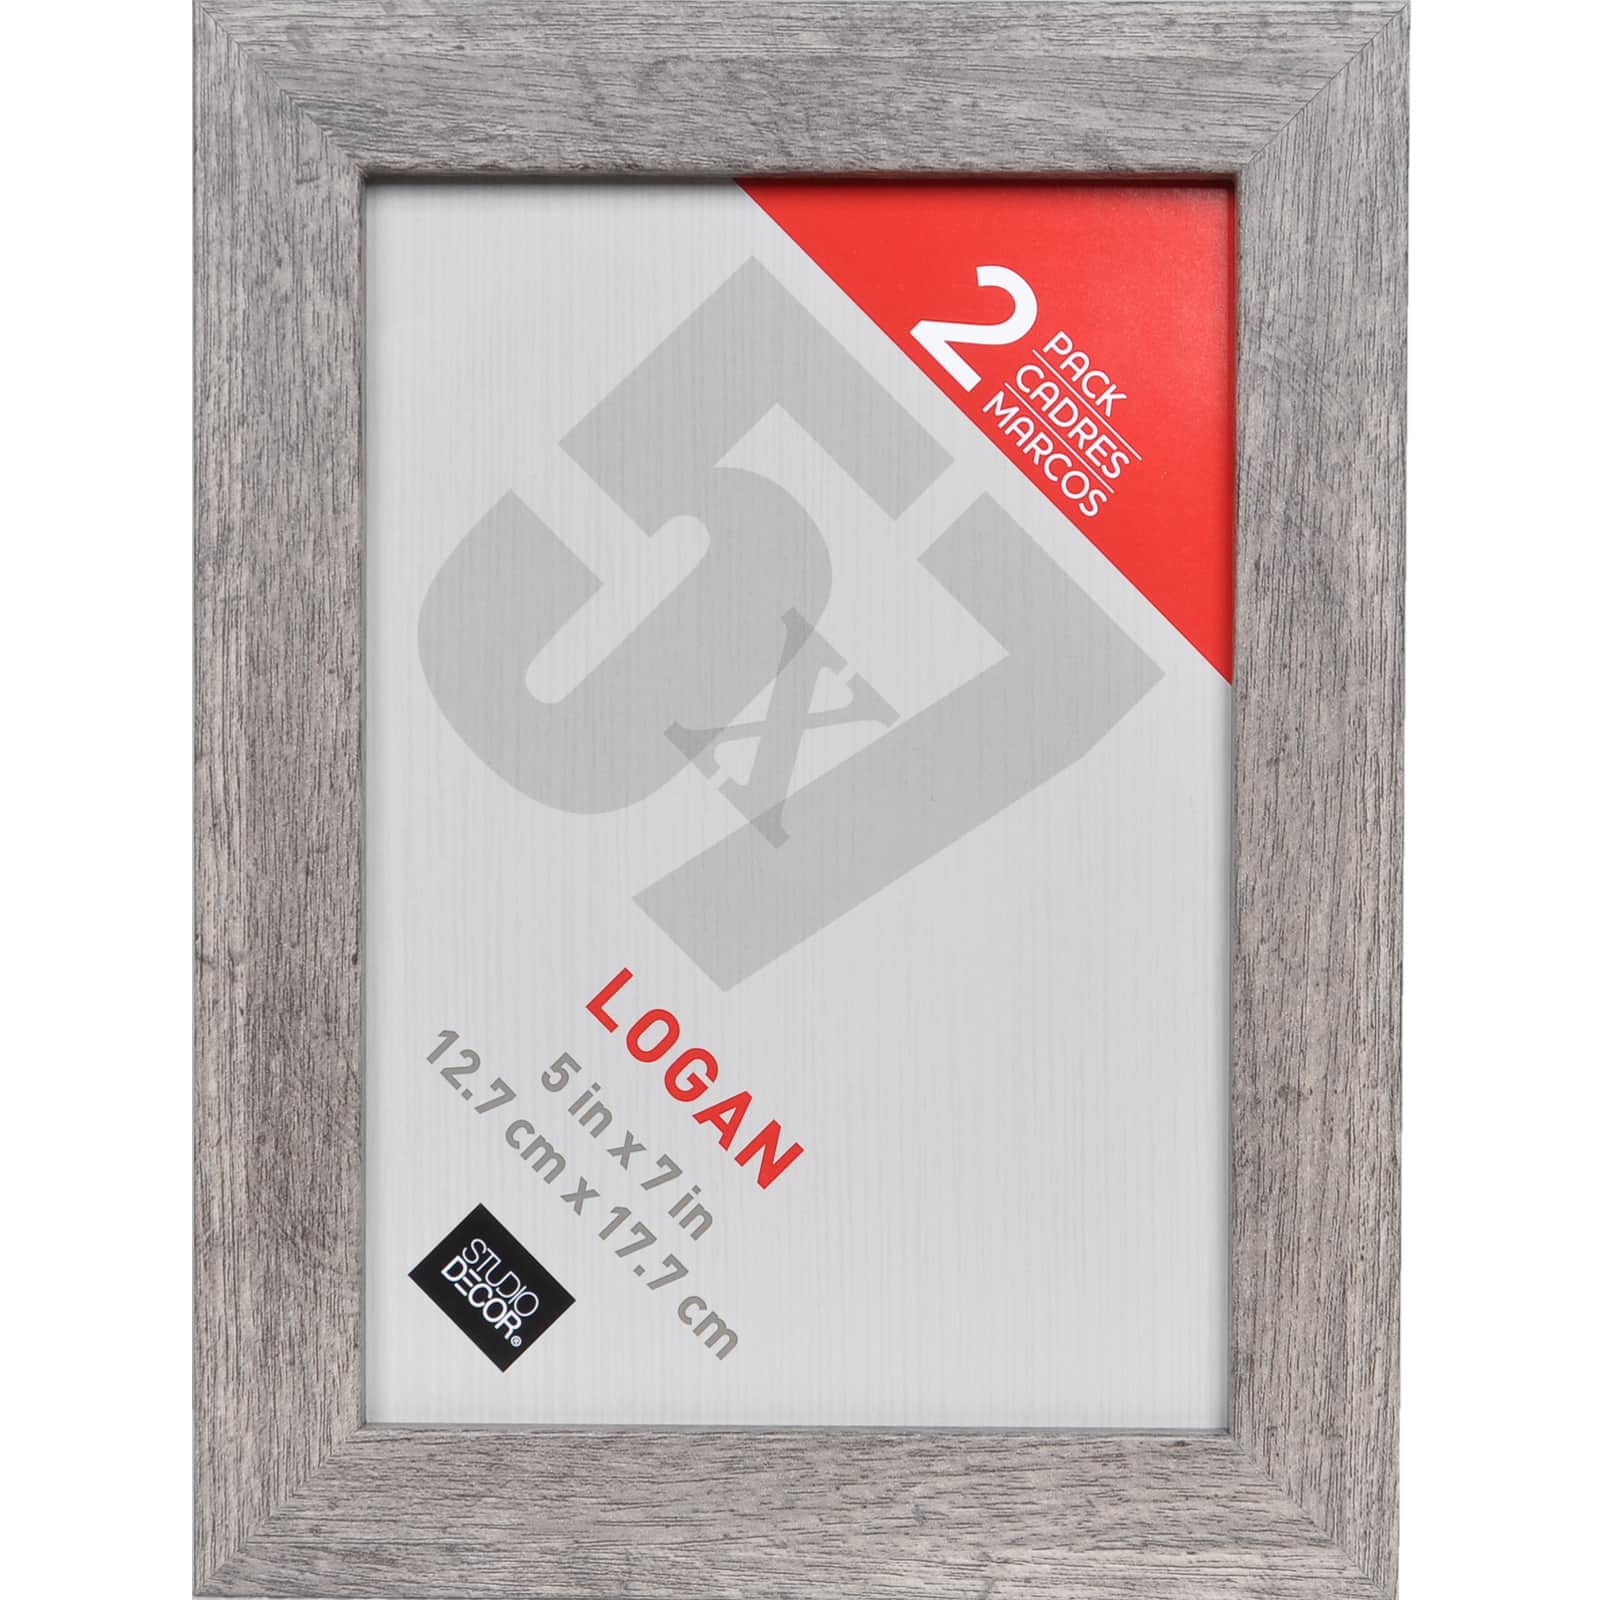 8x6 Gold Frame 8x6 Photo Frame Gold 8 X 6 Inch Gold Picture Frame Natural  Wood 6x8 Picture Frames Wooden Gold 8x6 Photo Frames 